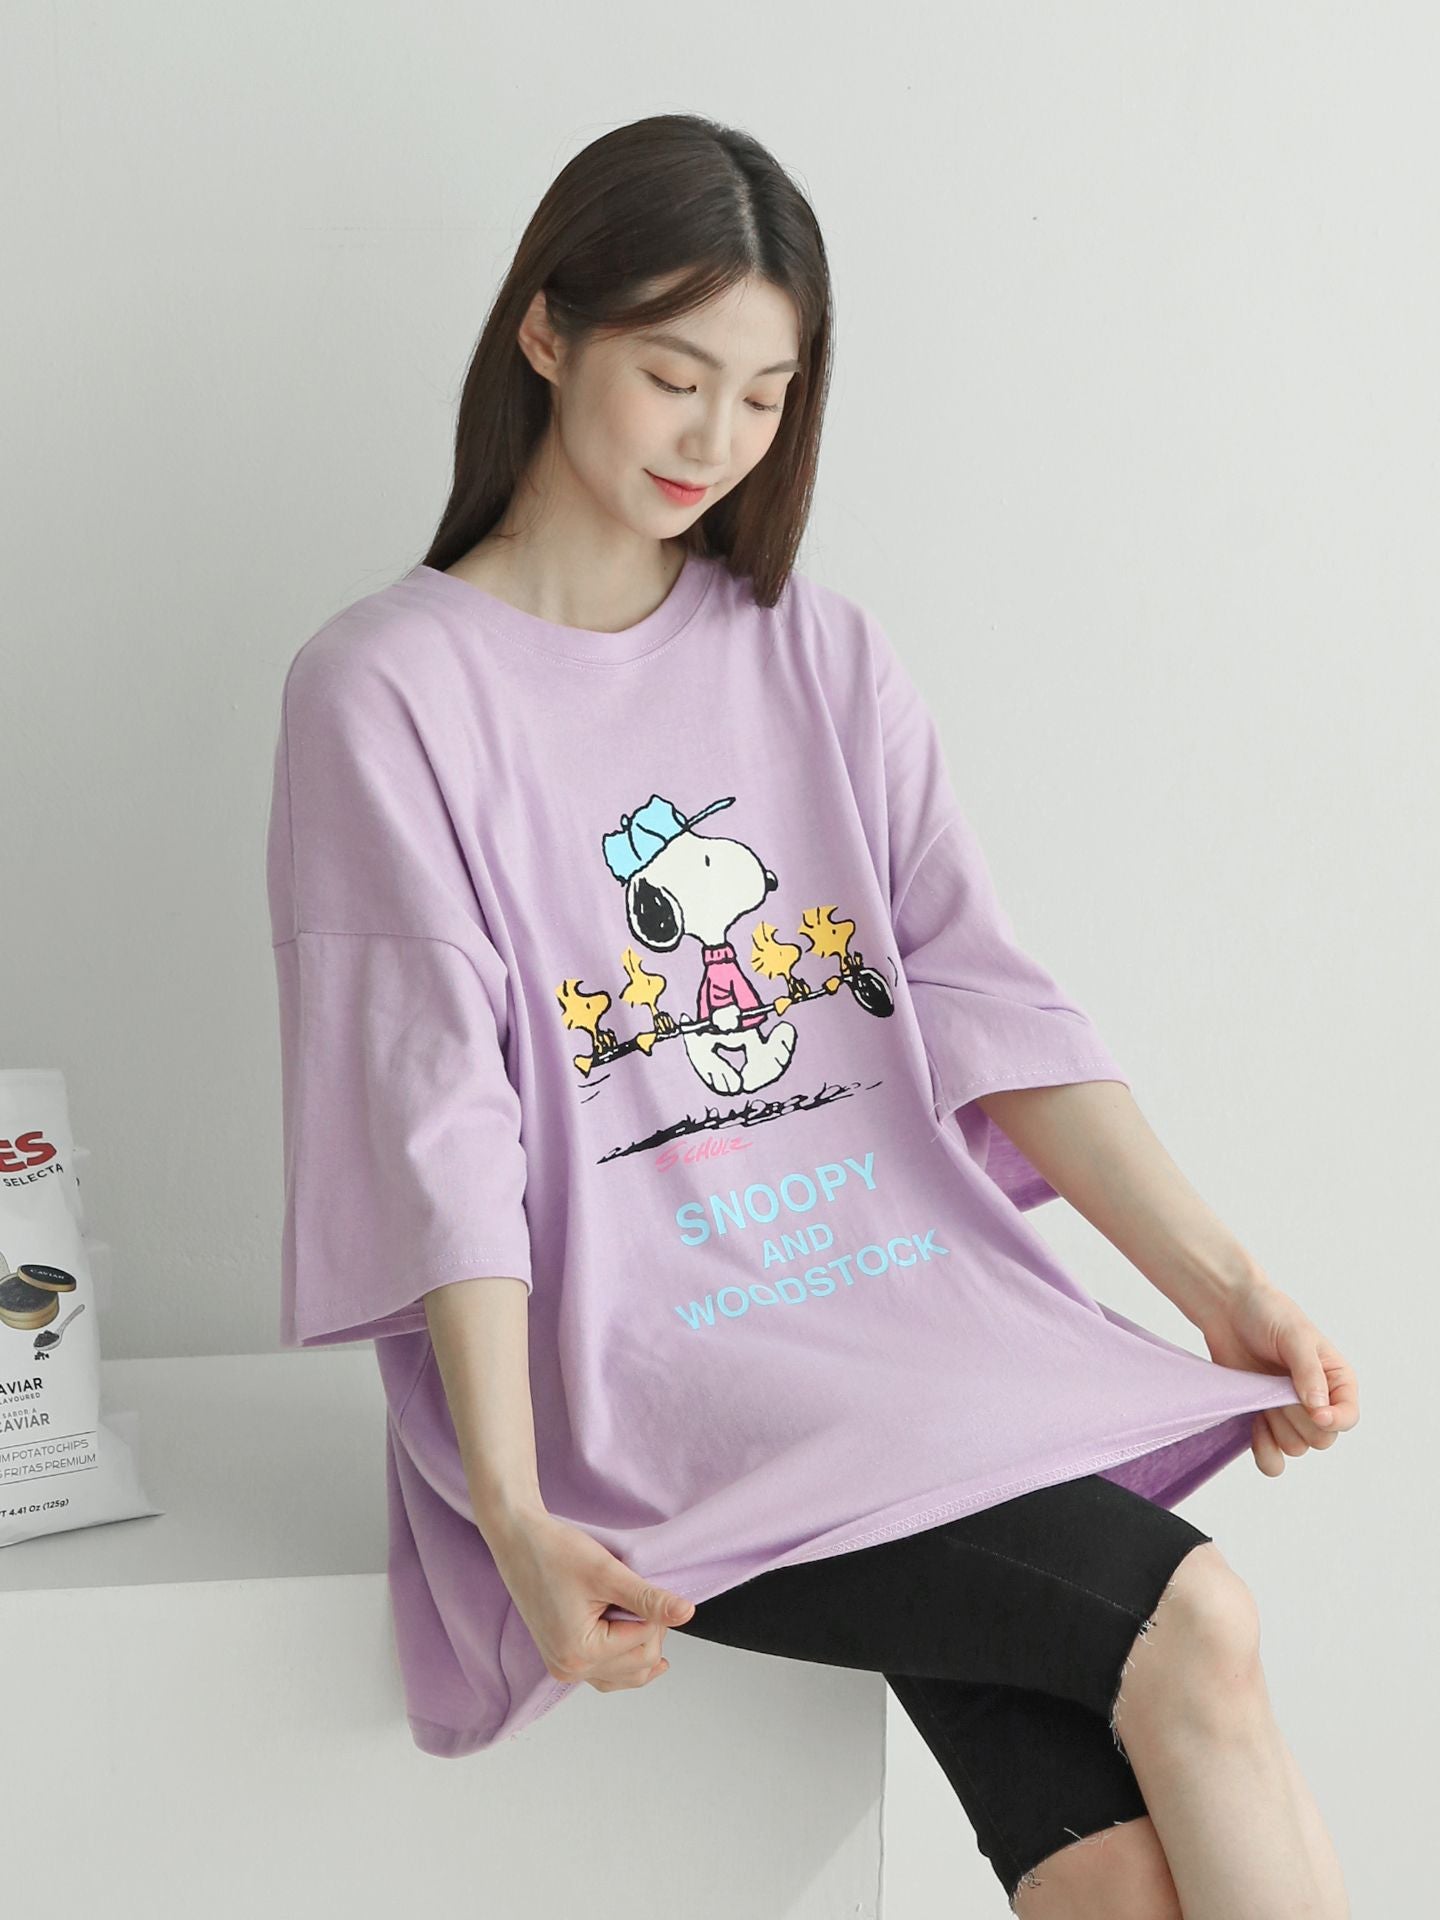 Loose fit Holding Going T-Shirts 3 Snoopy Forward Branch Colors